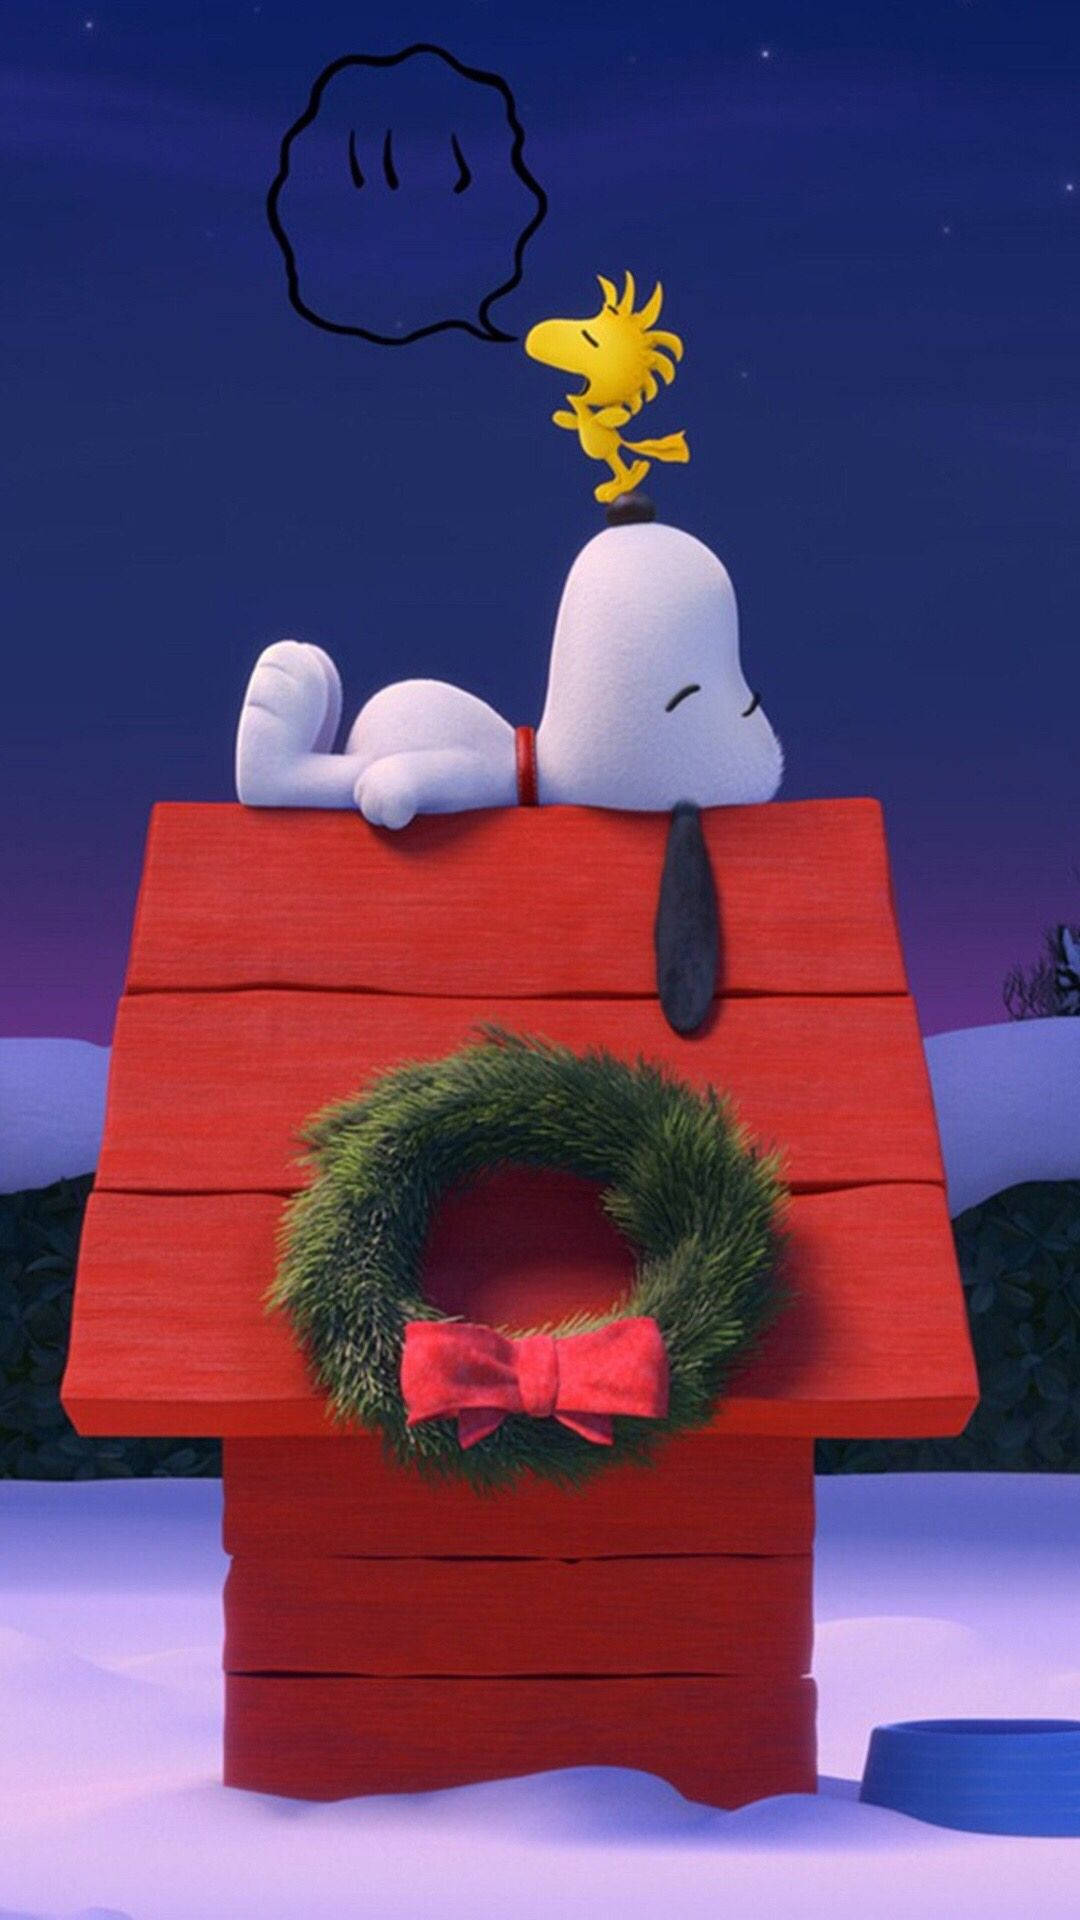 Snoopy’s Christmas in His Doghouse Wallpaper